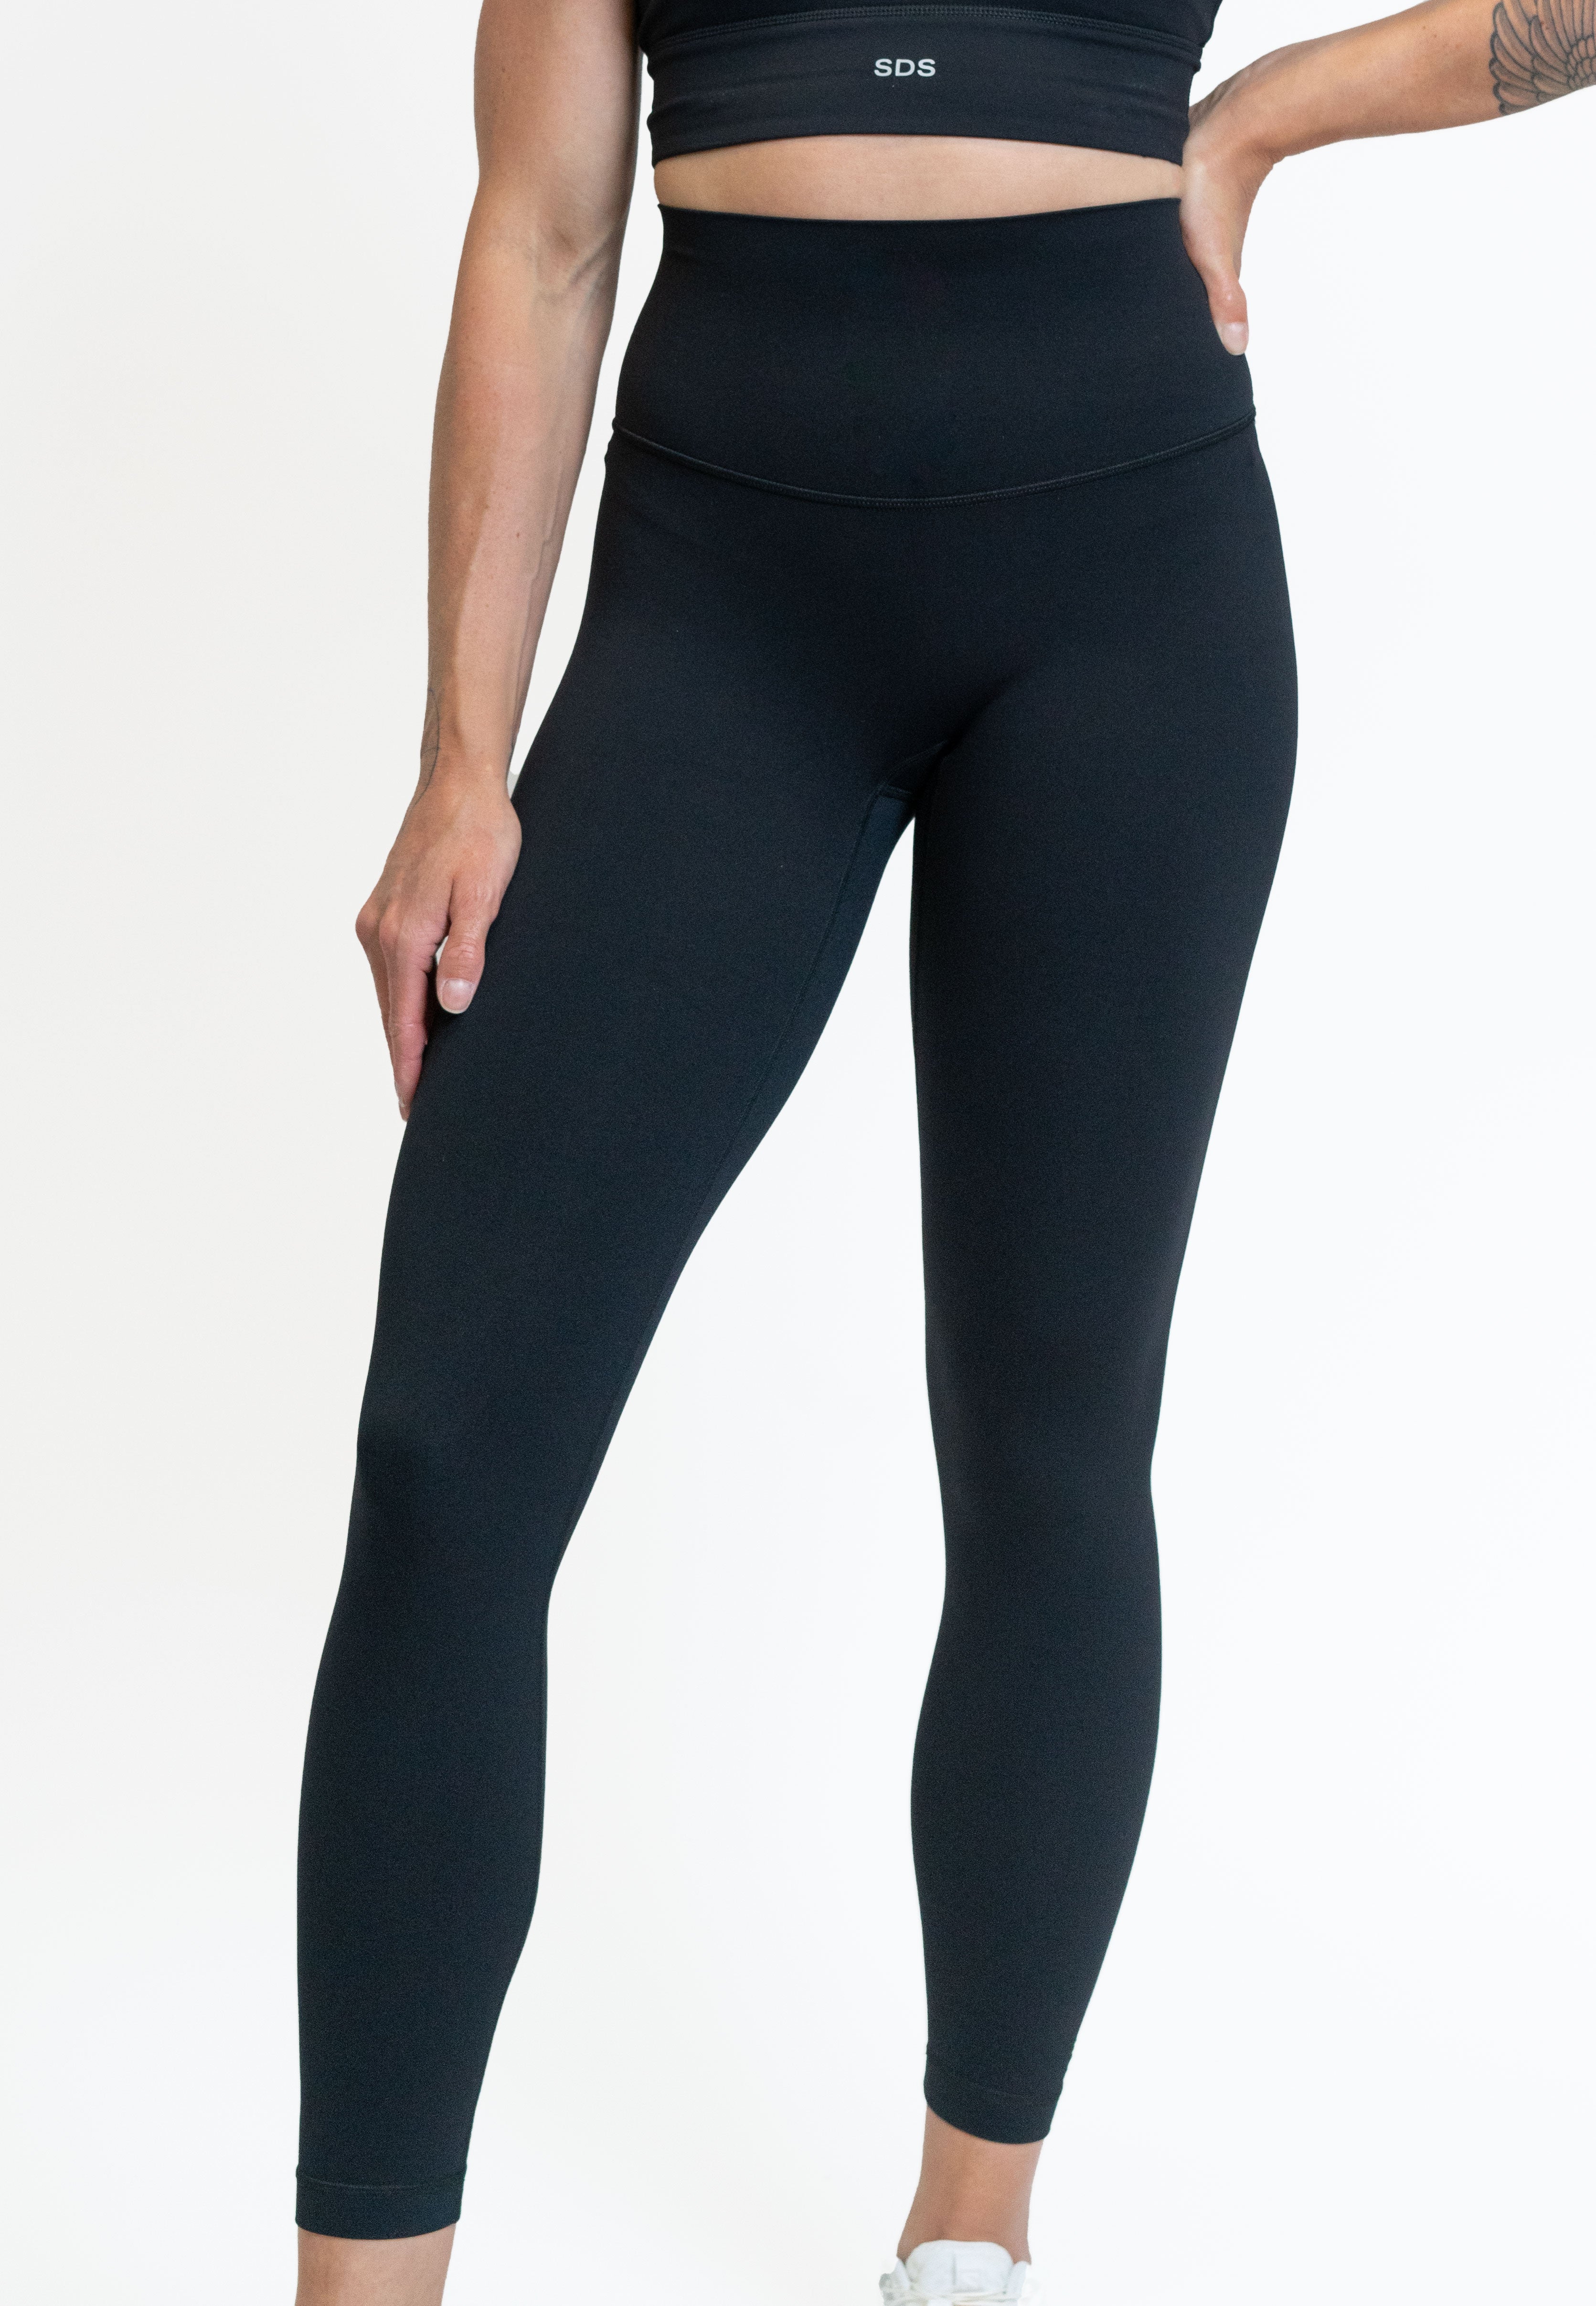 Performance-Tights Hohe Taille - Schwarz